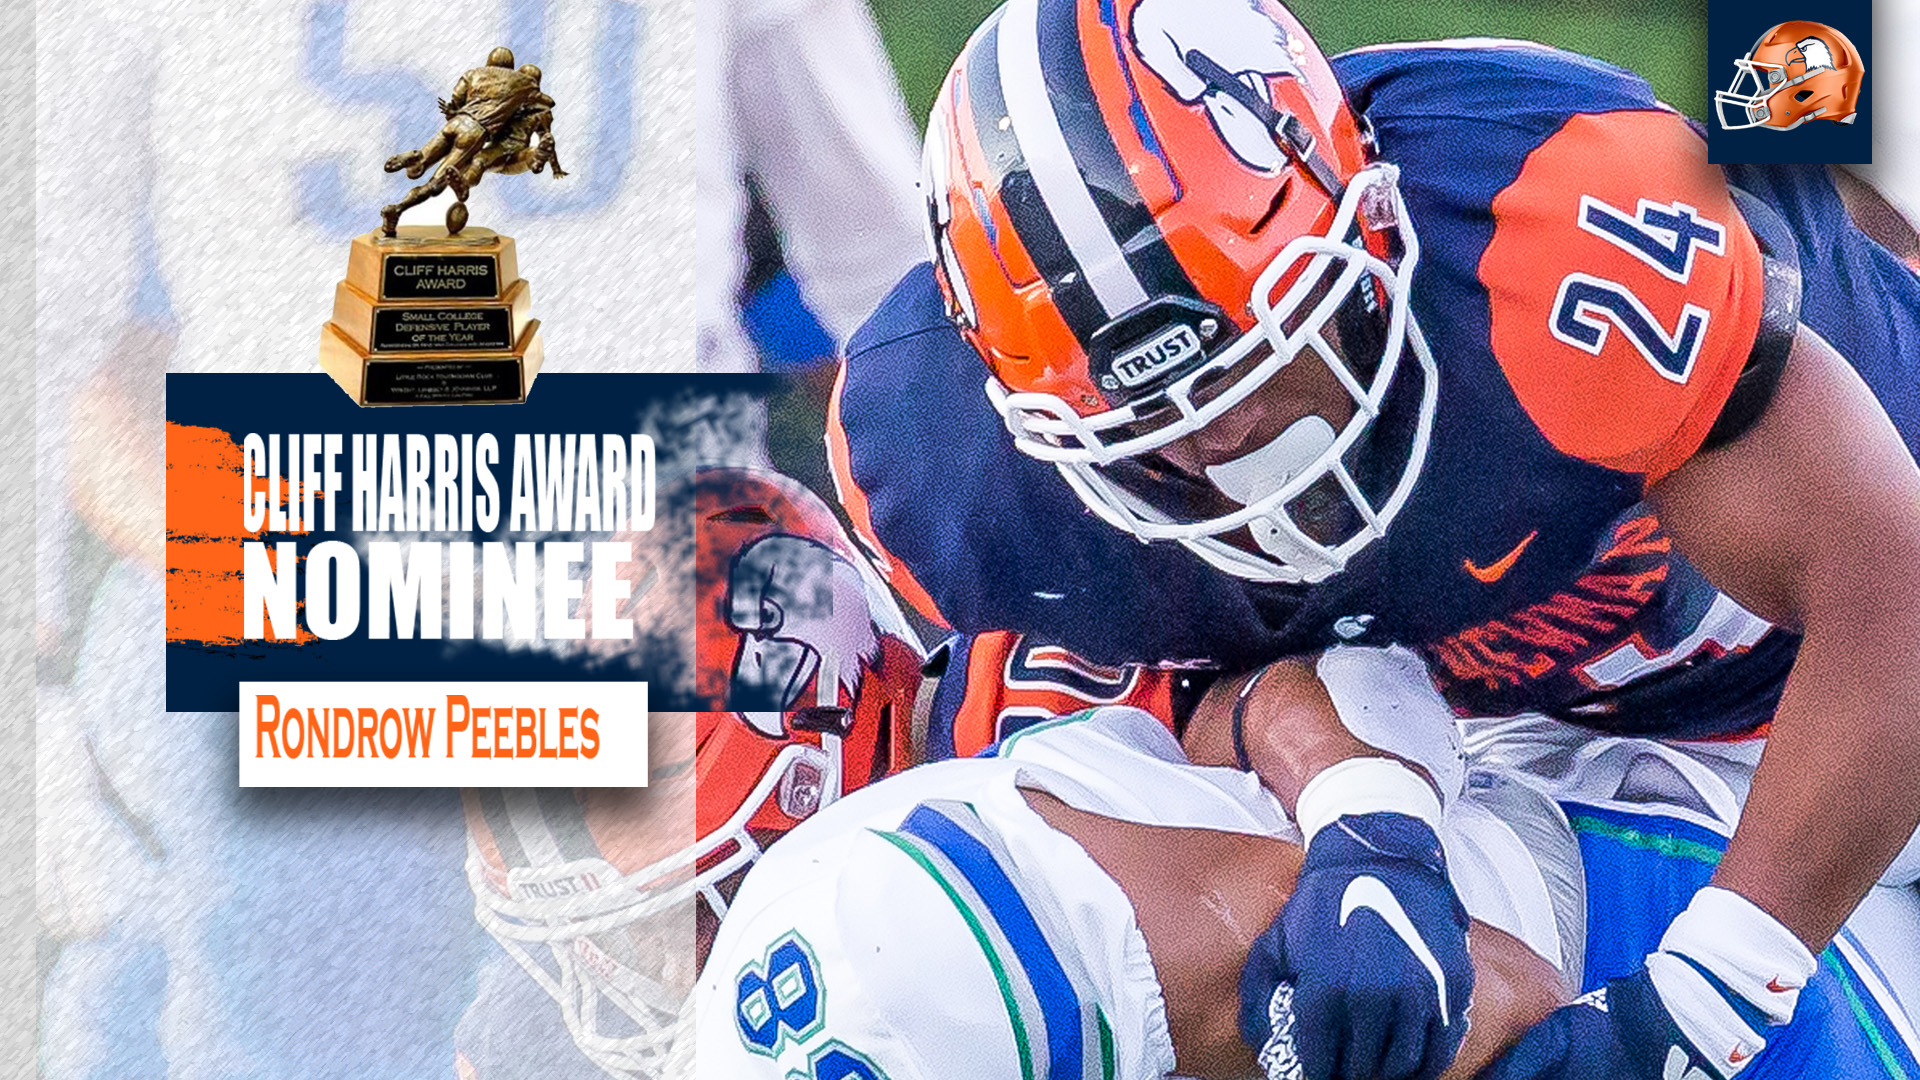 Peebles nominated for Cliff Harris Award